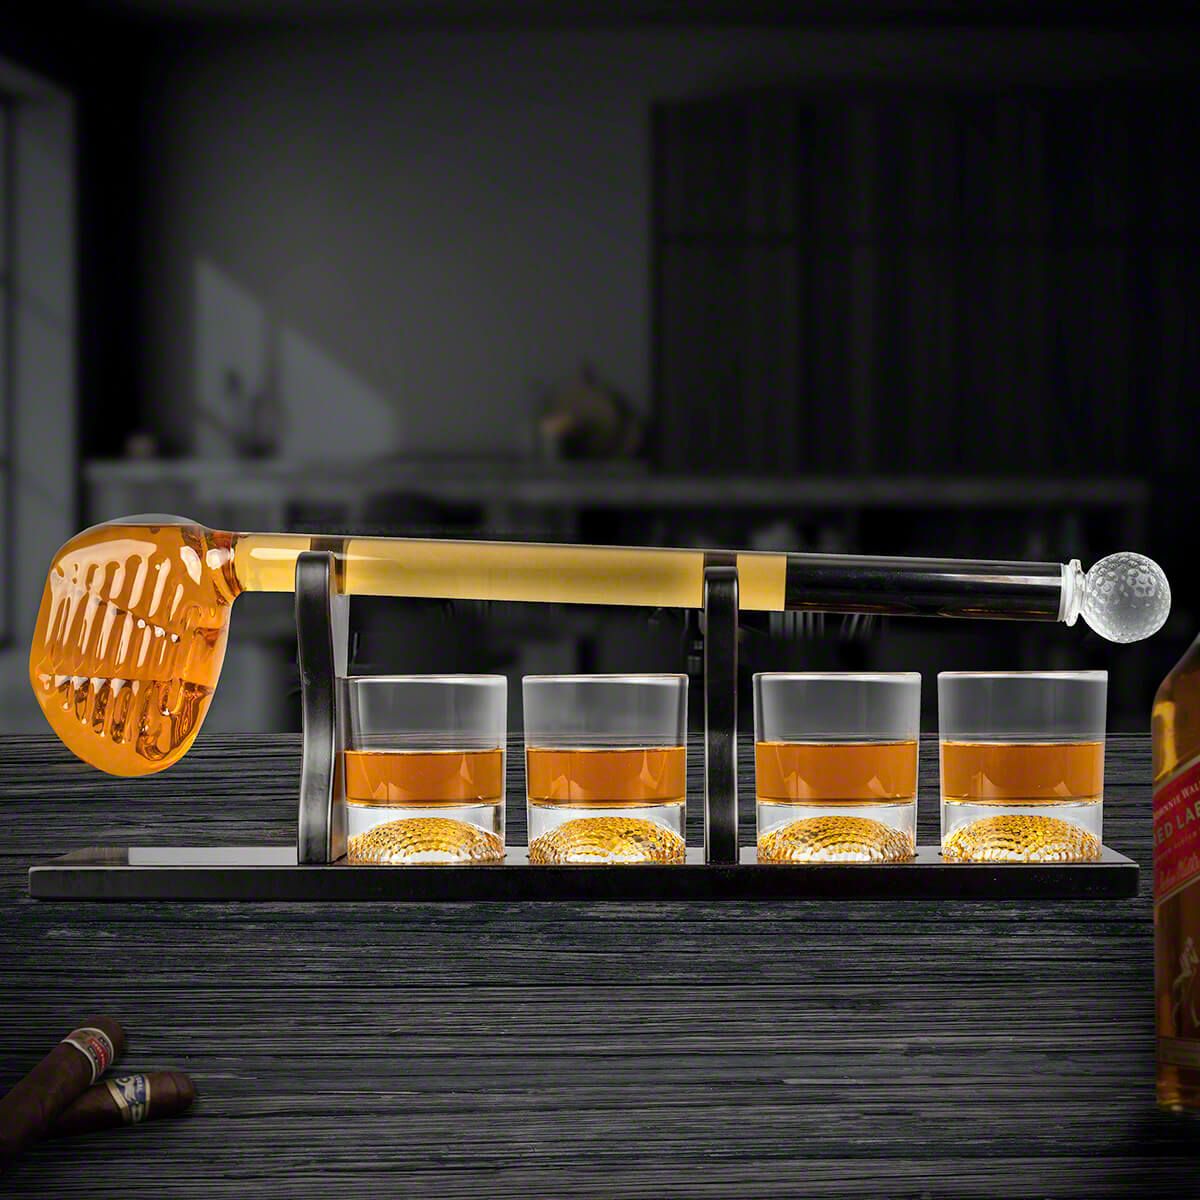 https://images.homewetbar.com/media/catalog/product/g/o/golf-club-whiskey-decanter-and-4-liquor-glasses-p_10611.jpg?store=default&image-type=image